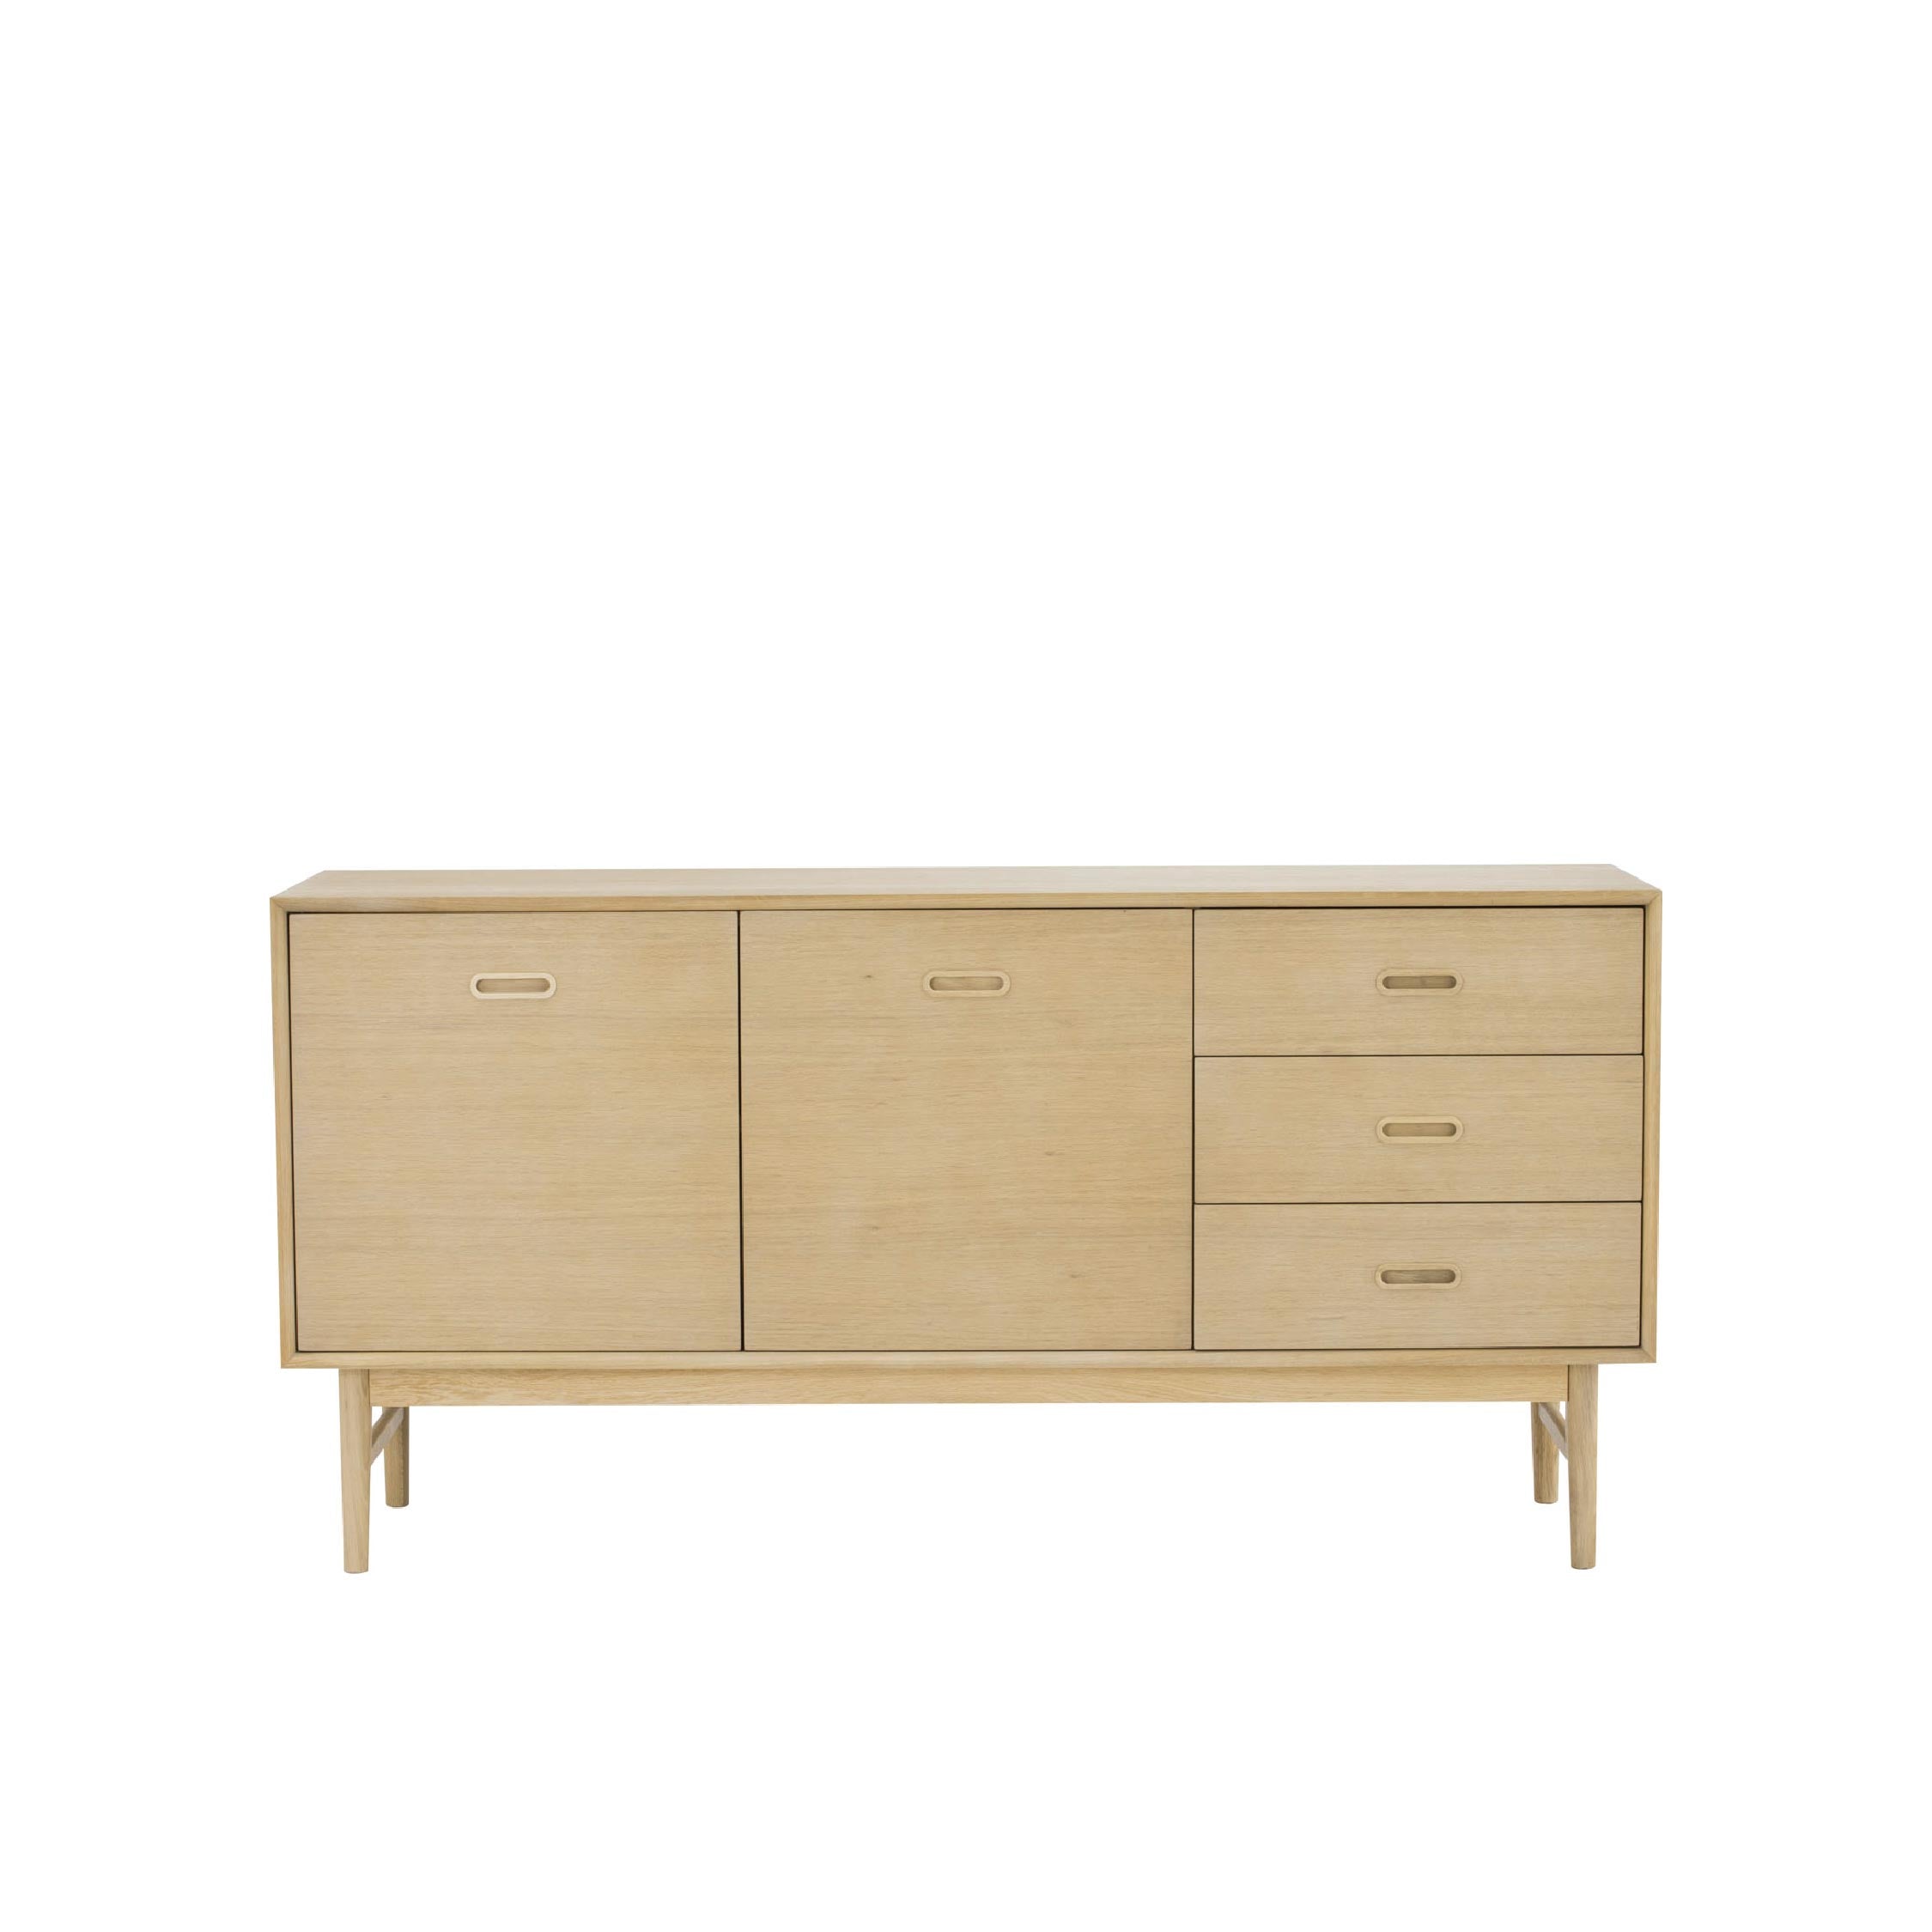 SOLID Sideboard 1.6m